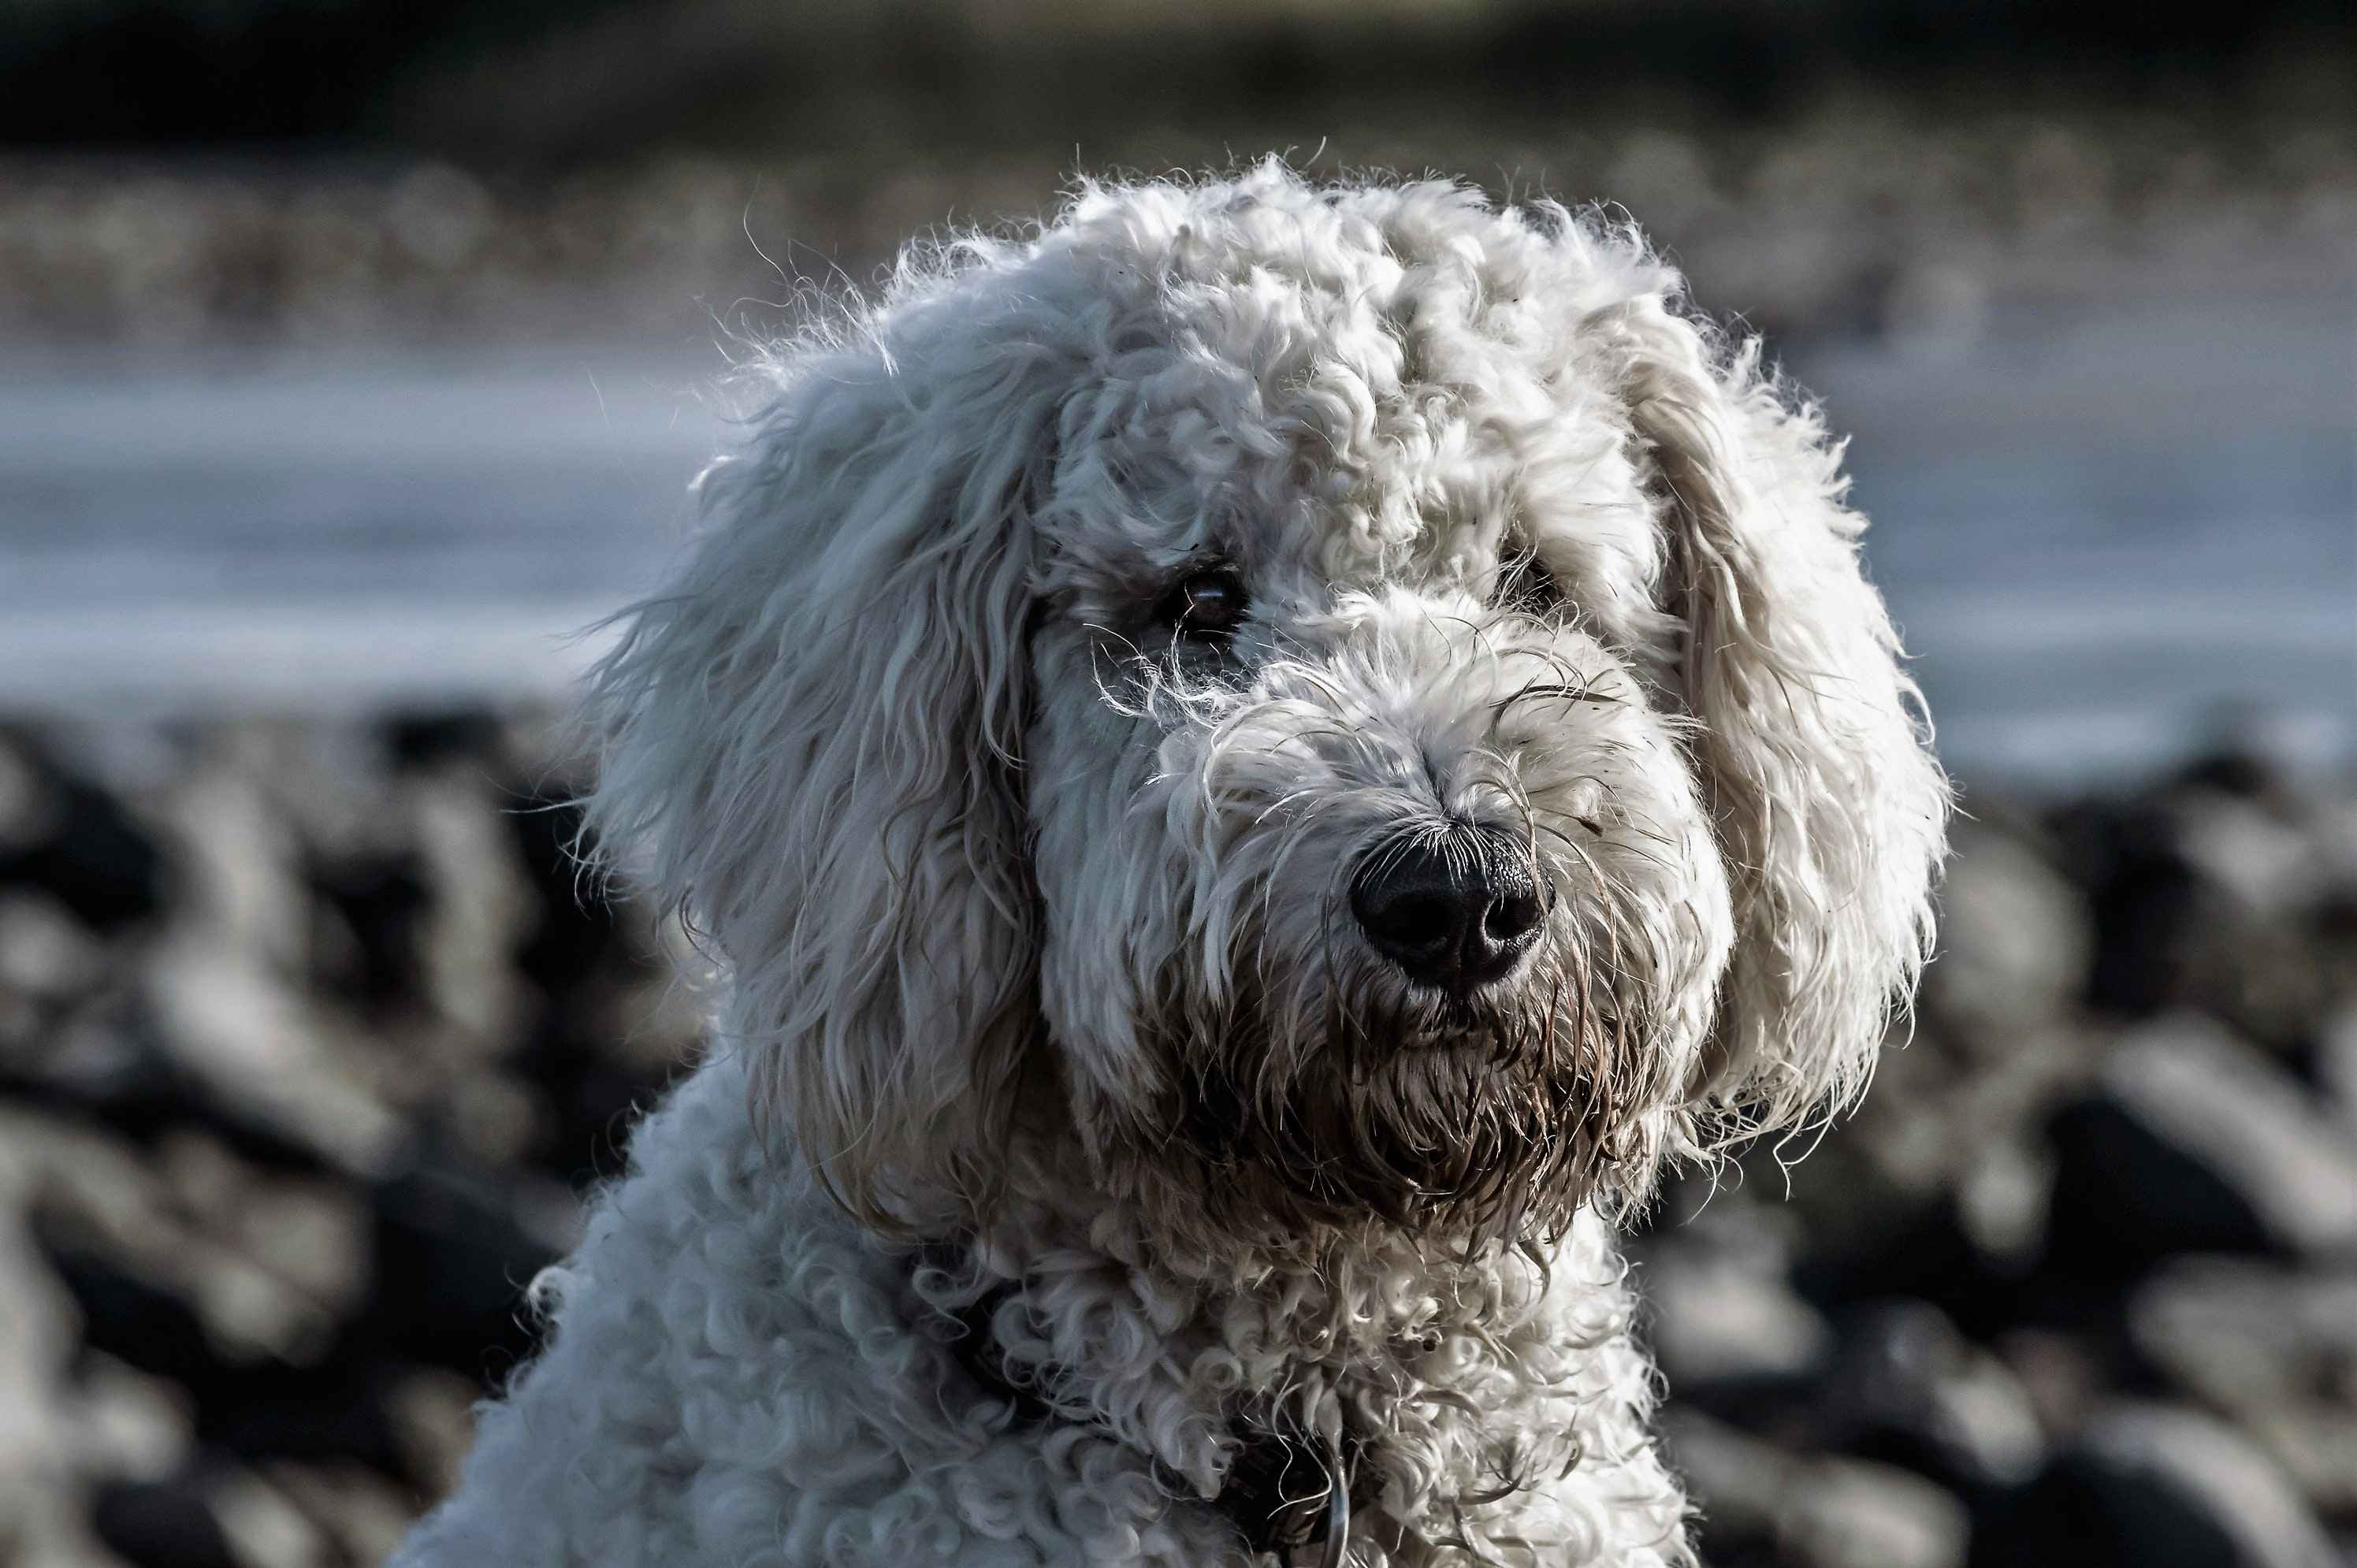 What are some common reproductive health issues seen in Poodle dog breeds, and how can they be treated?